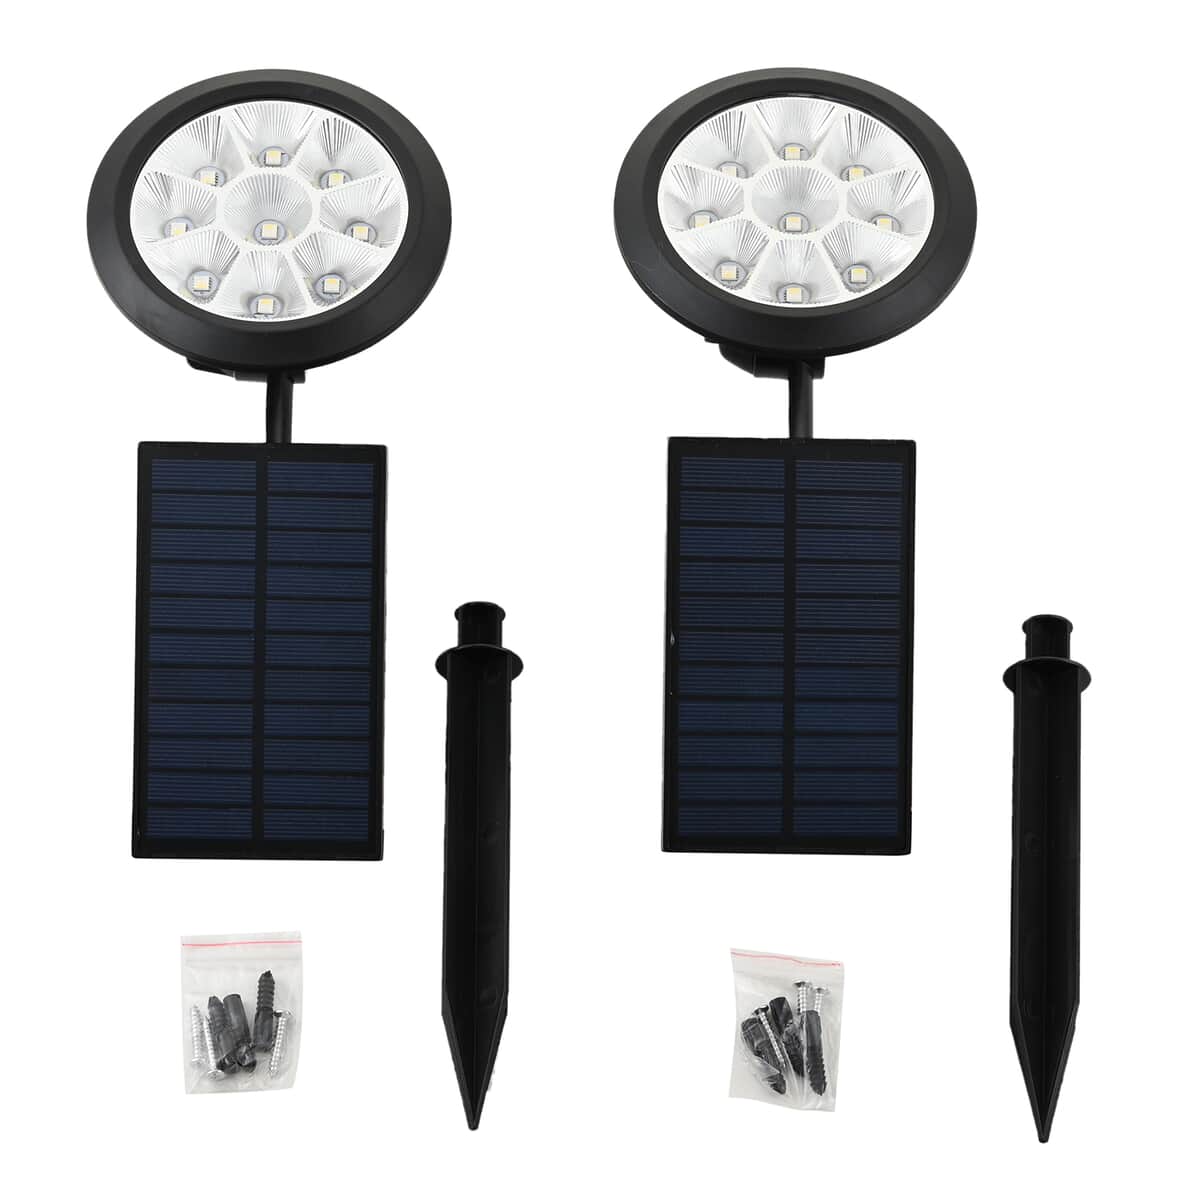 Set of 2 Black Solar Rechargeable, Waterproof, Colorful Lawn LED Lamp Light with Solar panels for Garden, Driveways, Walkways image number 0